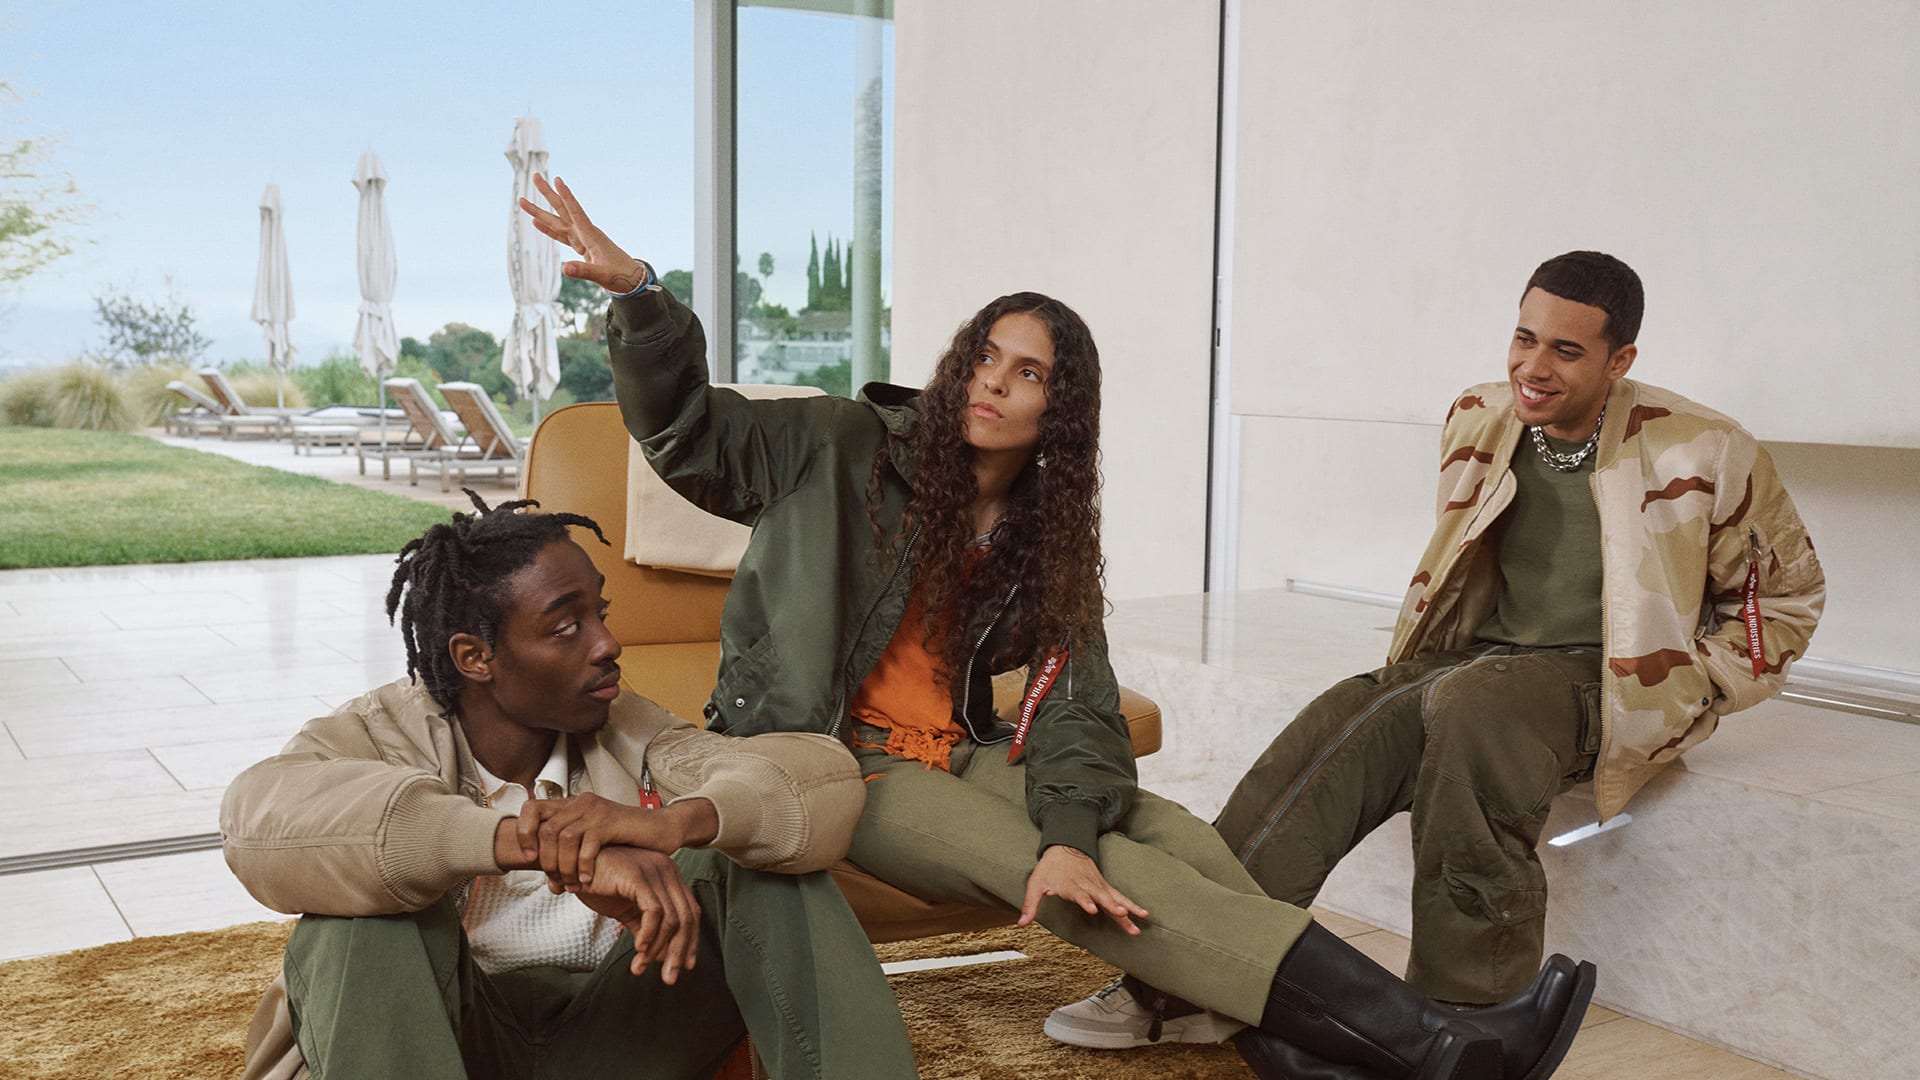 070 Shake and the 070 crew for Alpha Industries&#x27; SS22 campaign